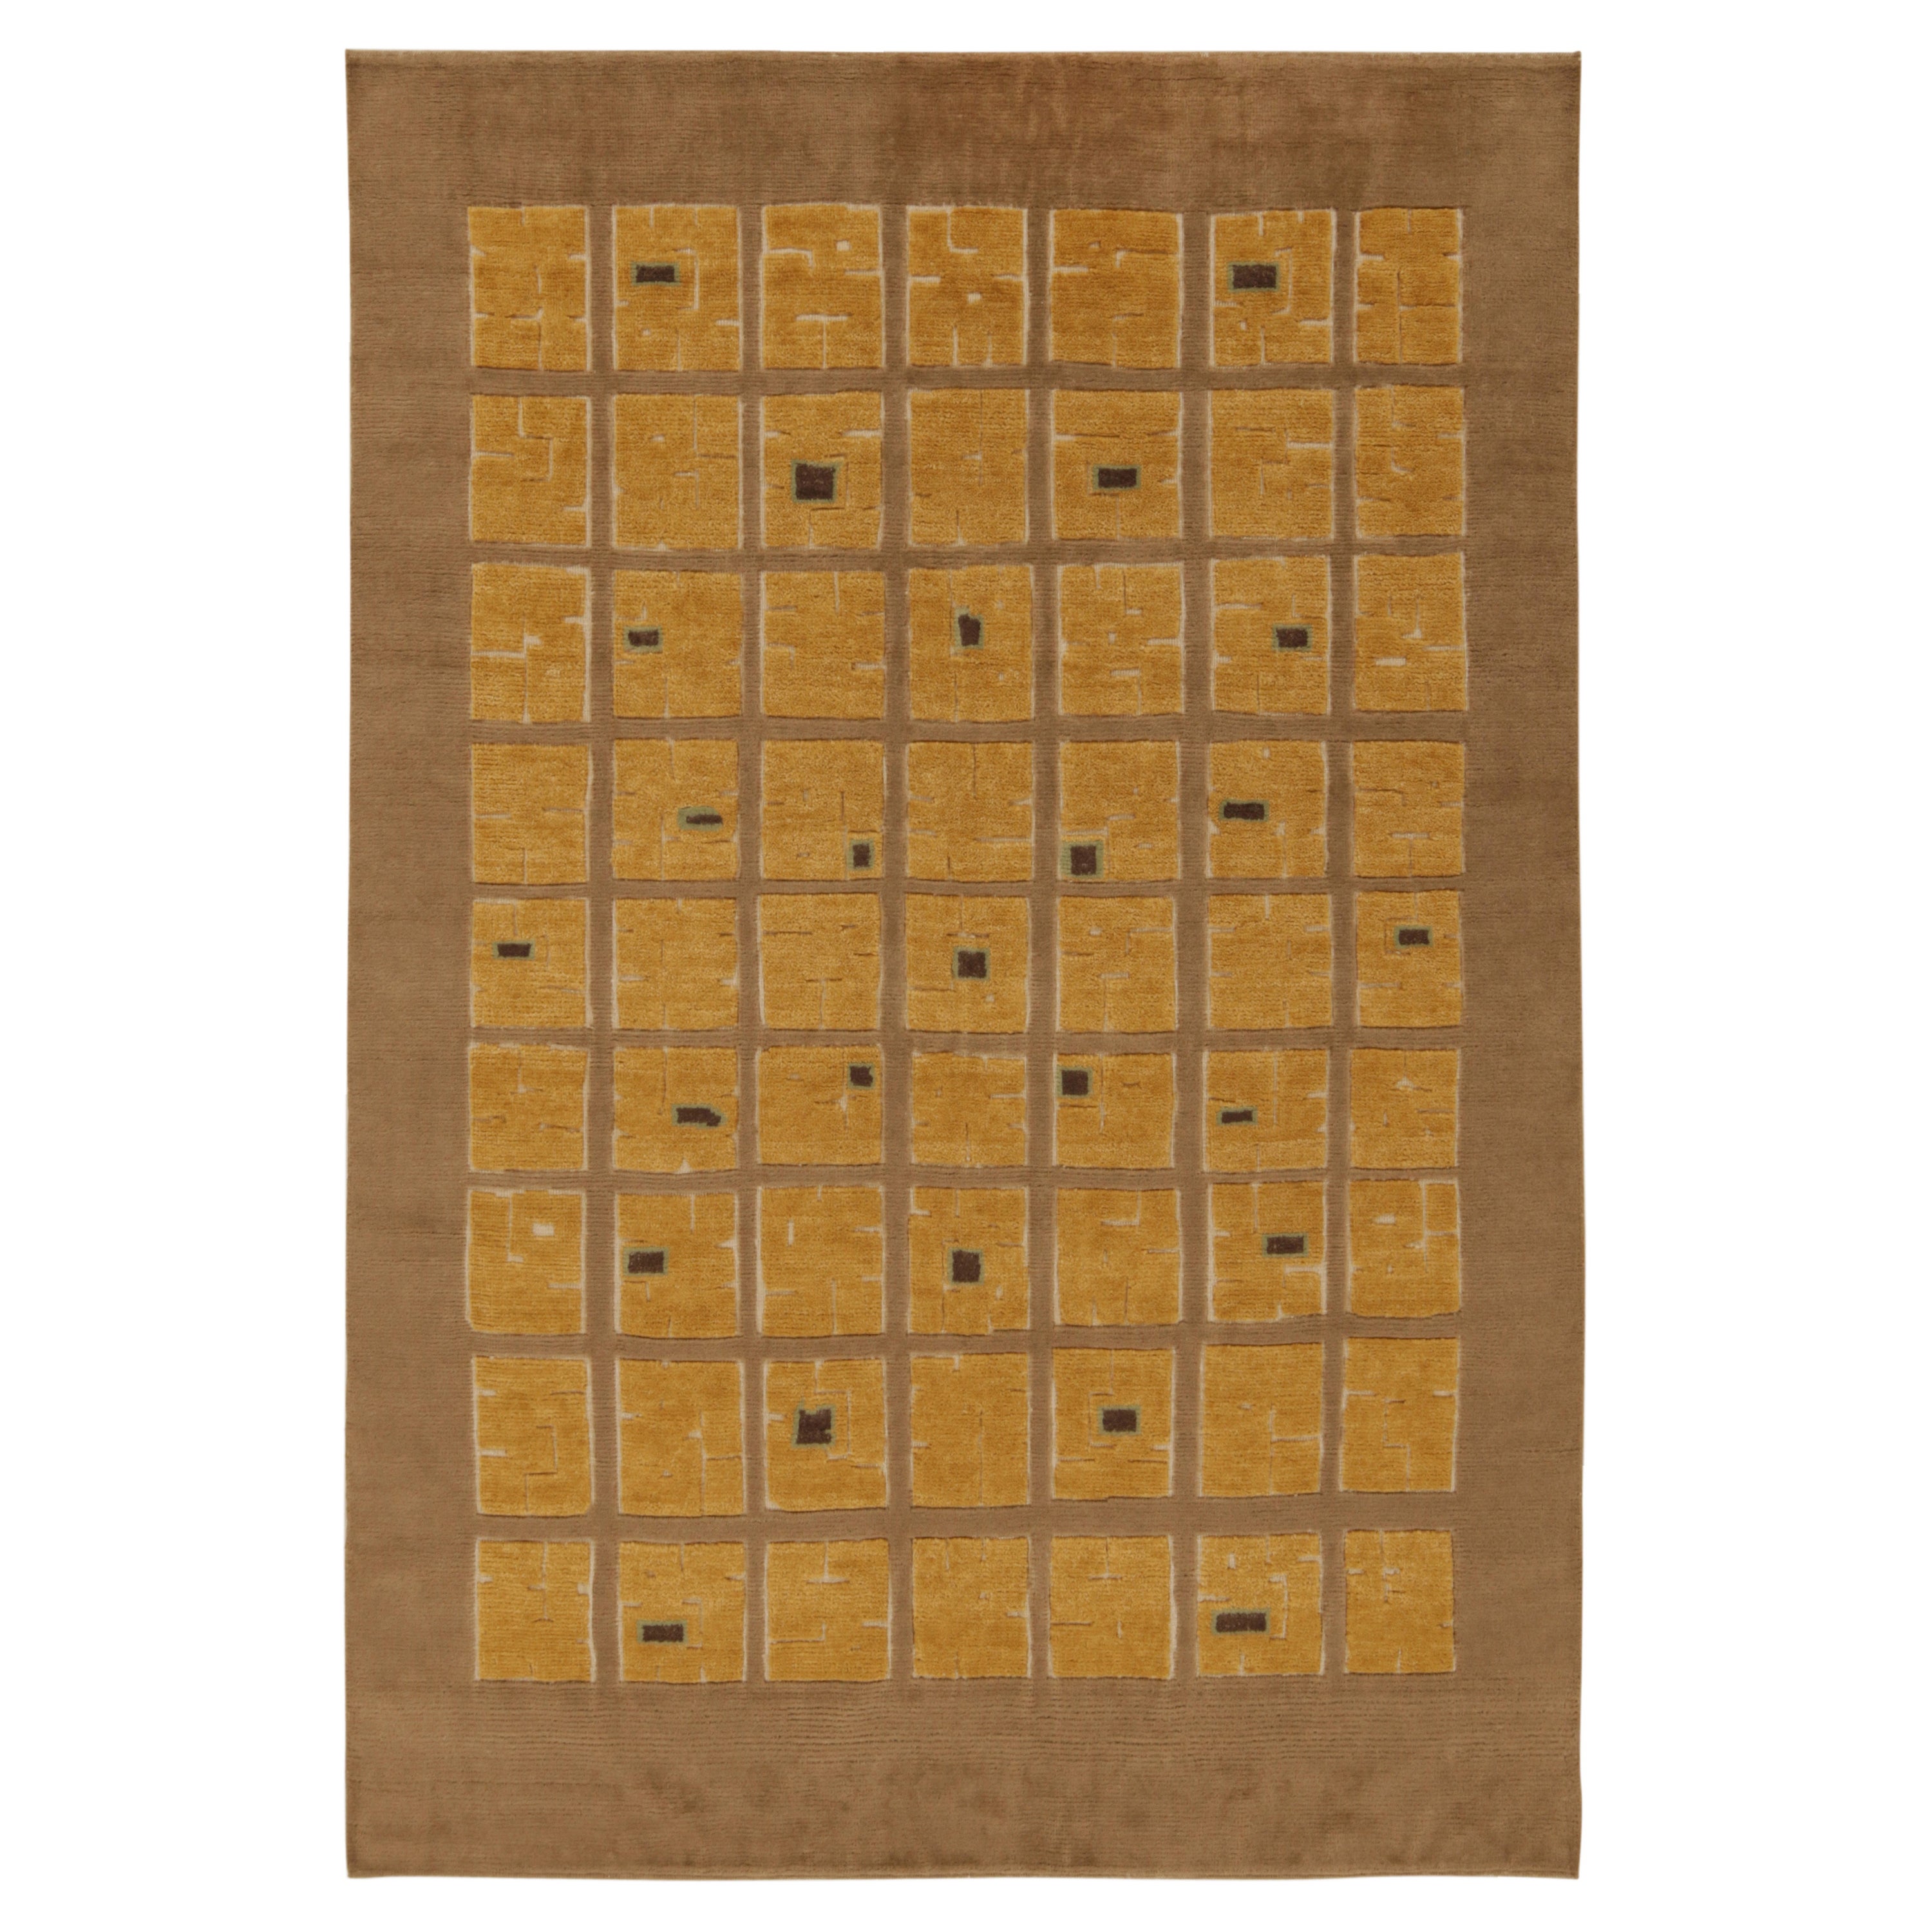 Rug & Kilim’s French Art Deco Style Rug in Beige-Brown with Gold Square Patterns